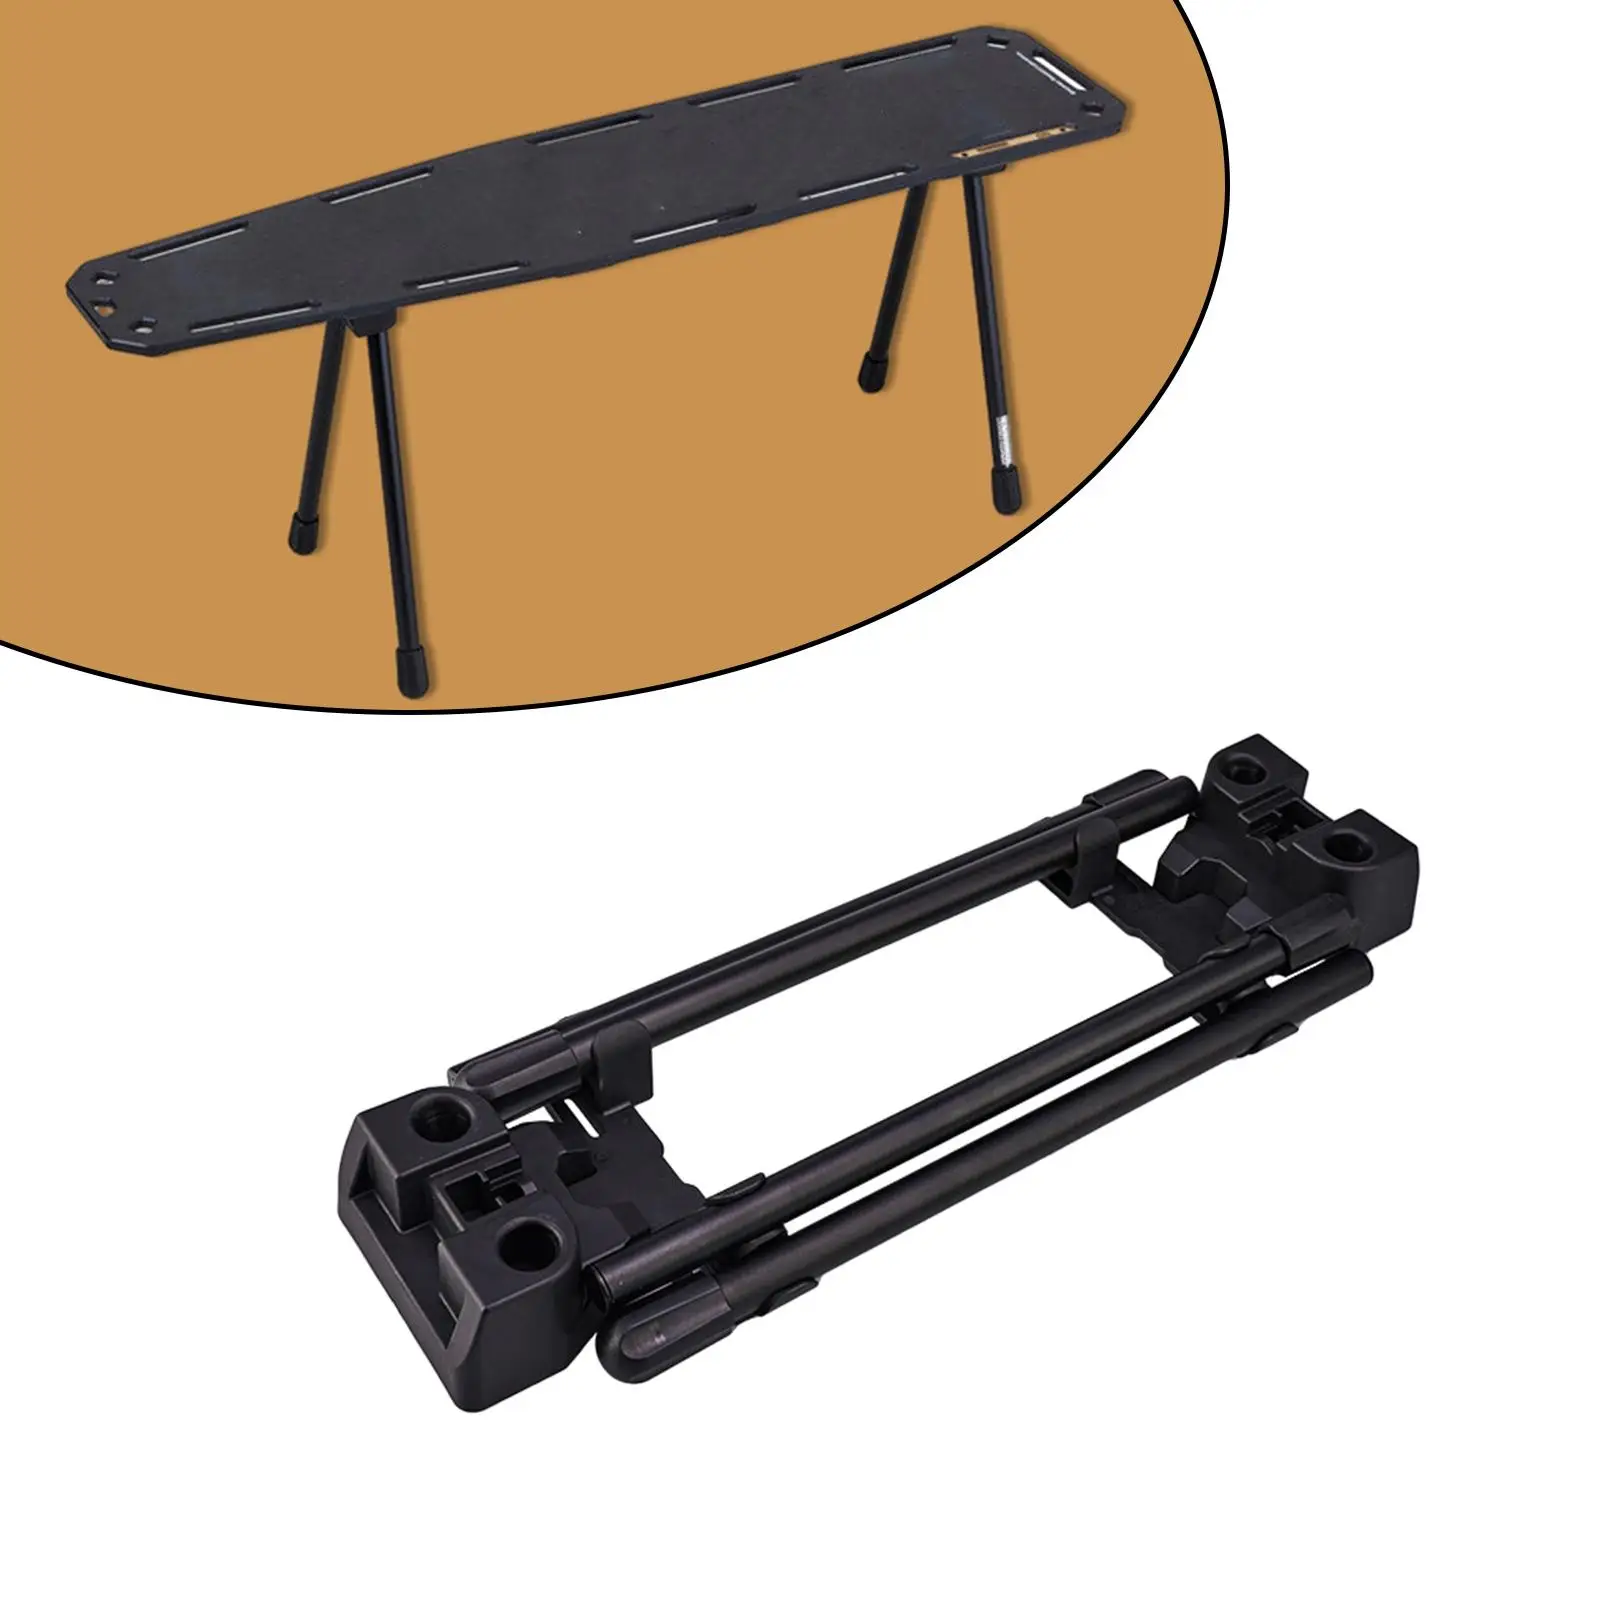 2 Pieces Folding Table Legs Heavy Duty Replacement Furniture Legs for Bench Mini Computer Desk Table Laptop Table Office